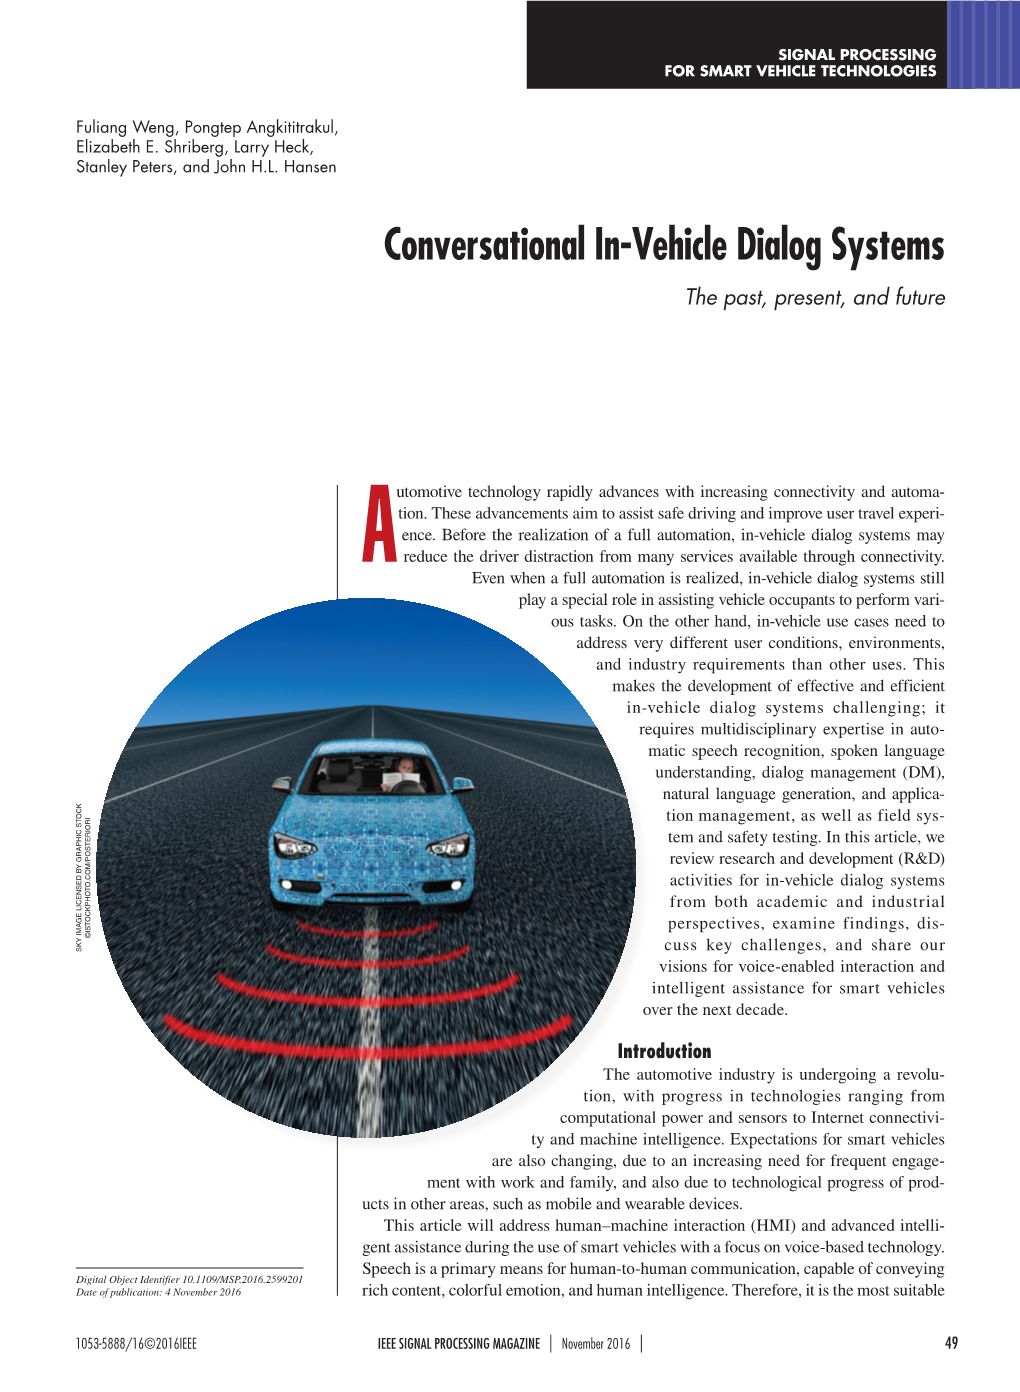 Conversational In-Vehicle Dialog Systems the Past, Present, and Future